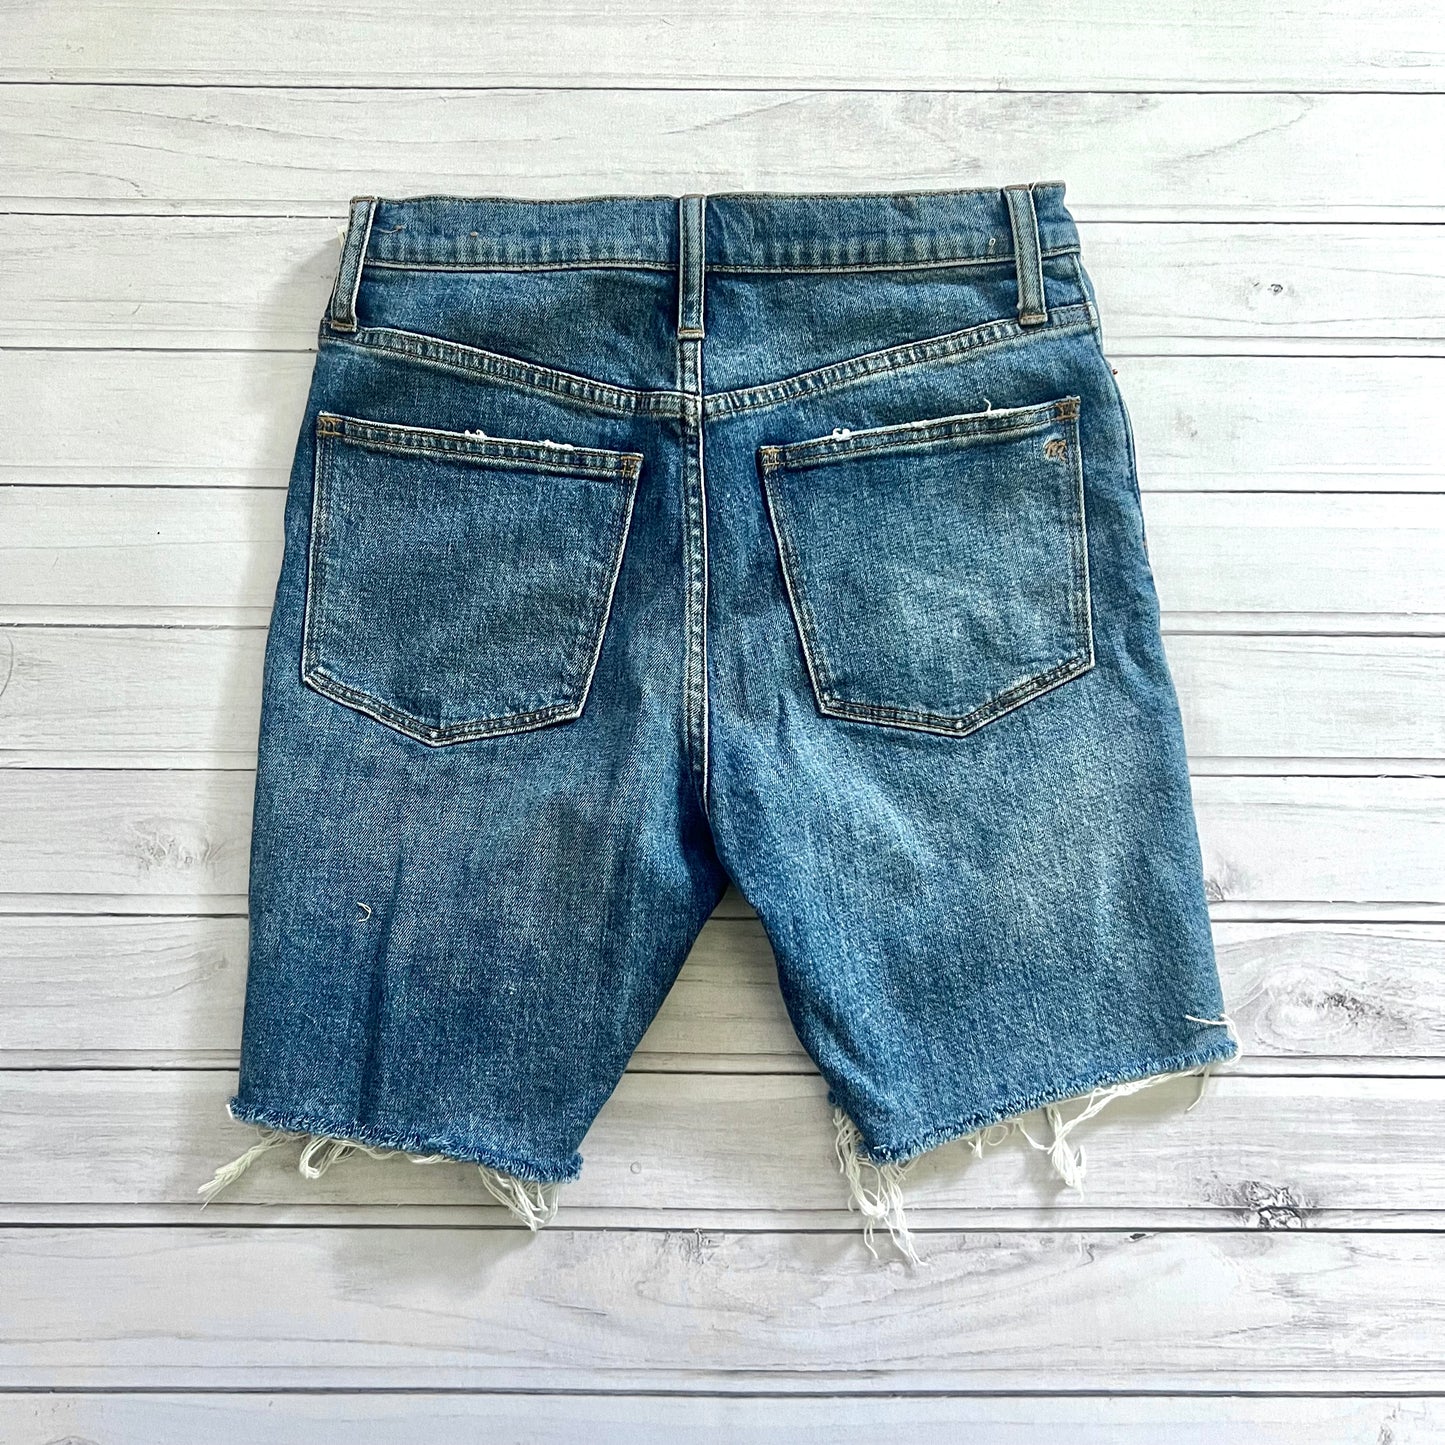 Shorts By Madewell  Size: 4